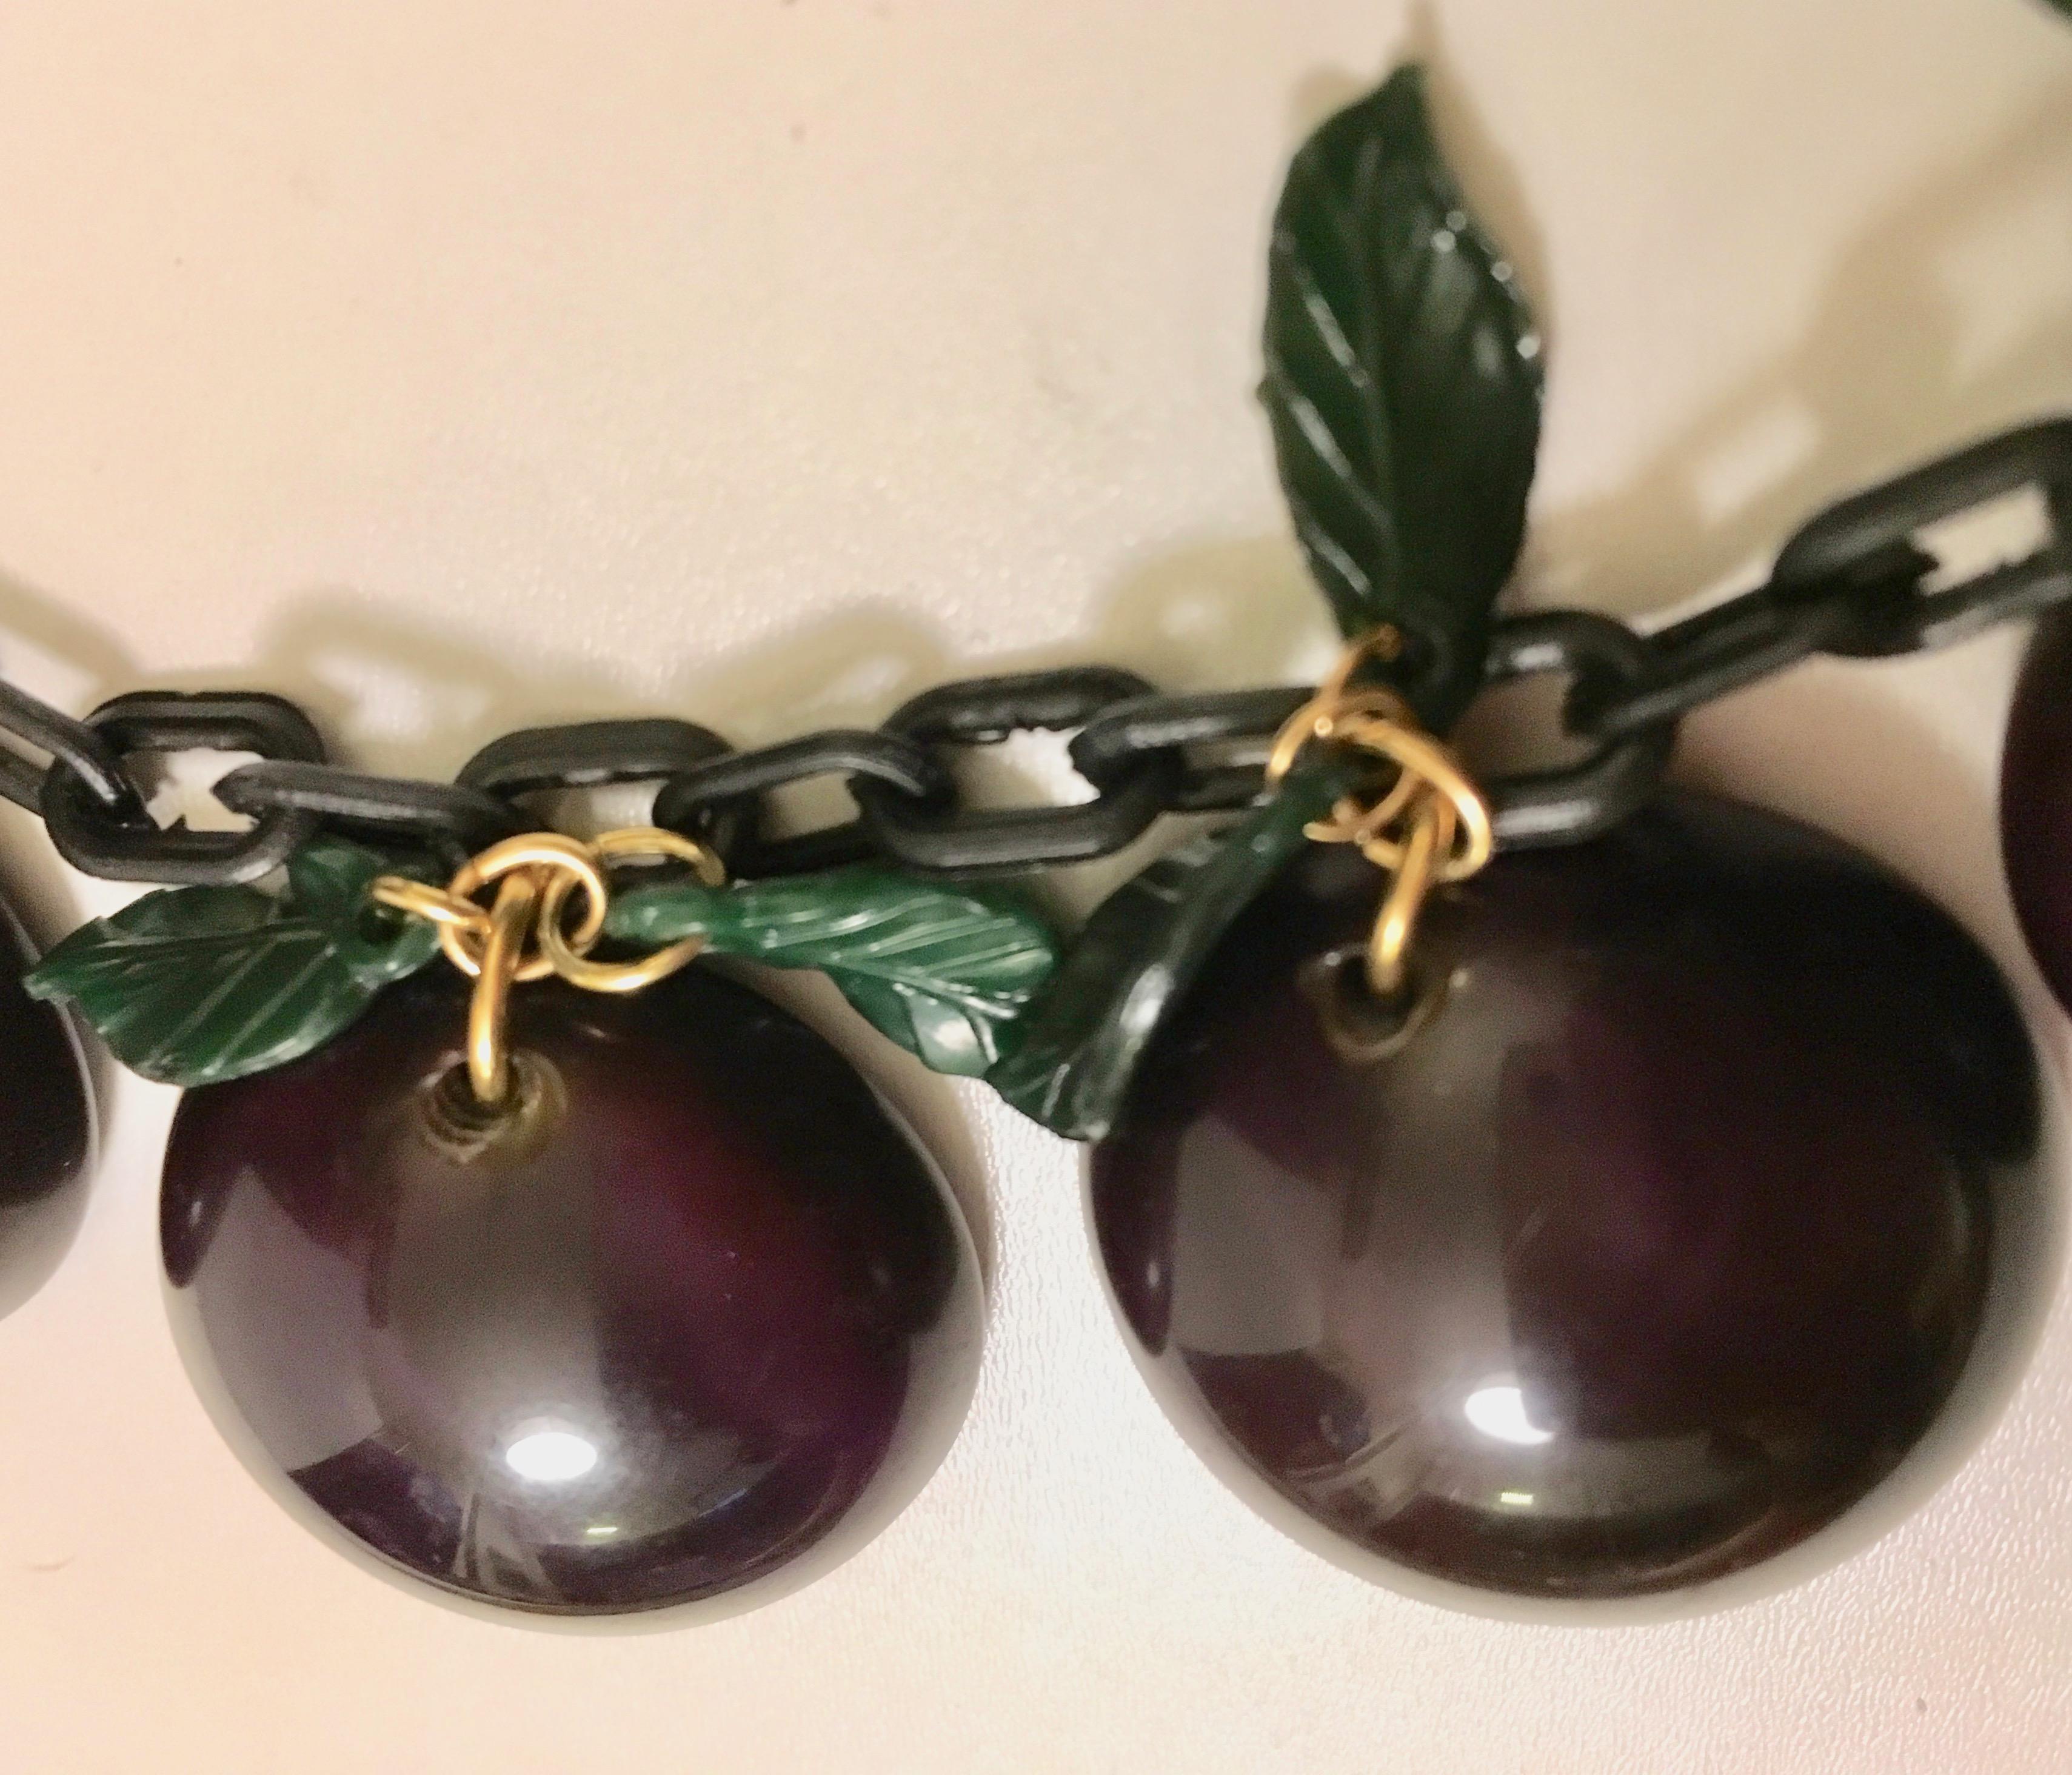  Bakelite Necklace Grape with Matching Earrings Jan Carlin In Excellent Condition For Sale In Boca Raton, FL